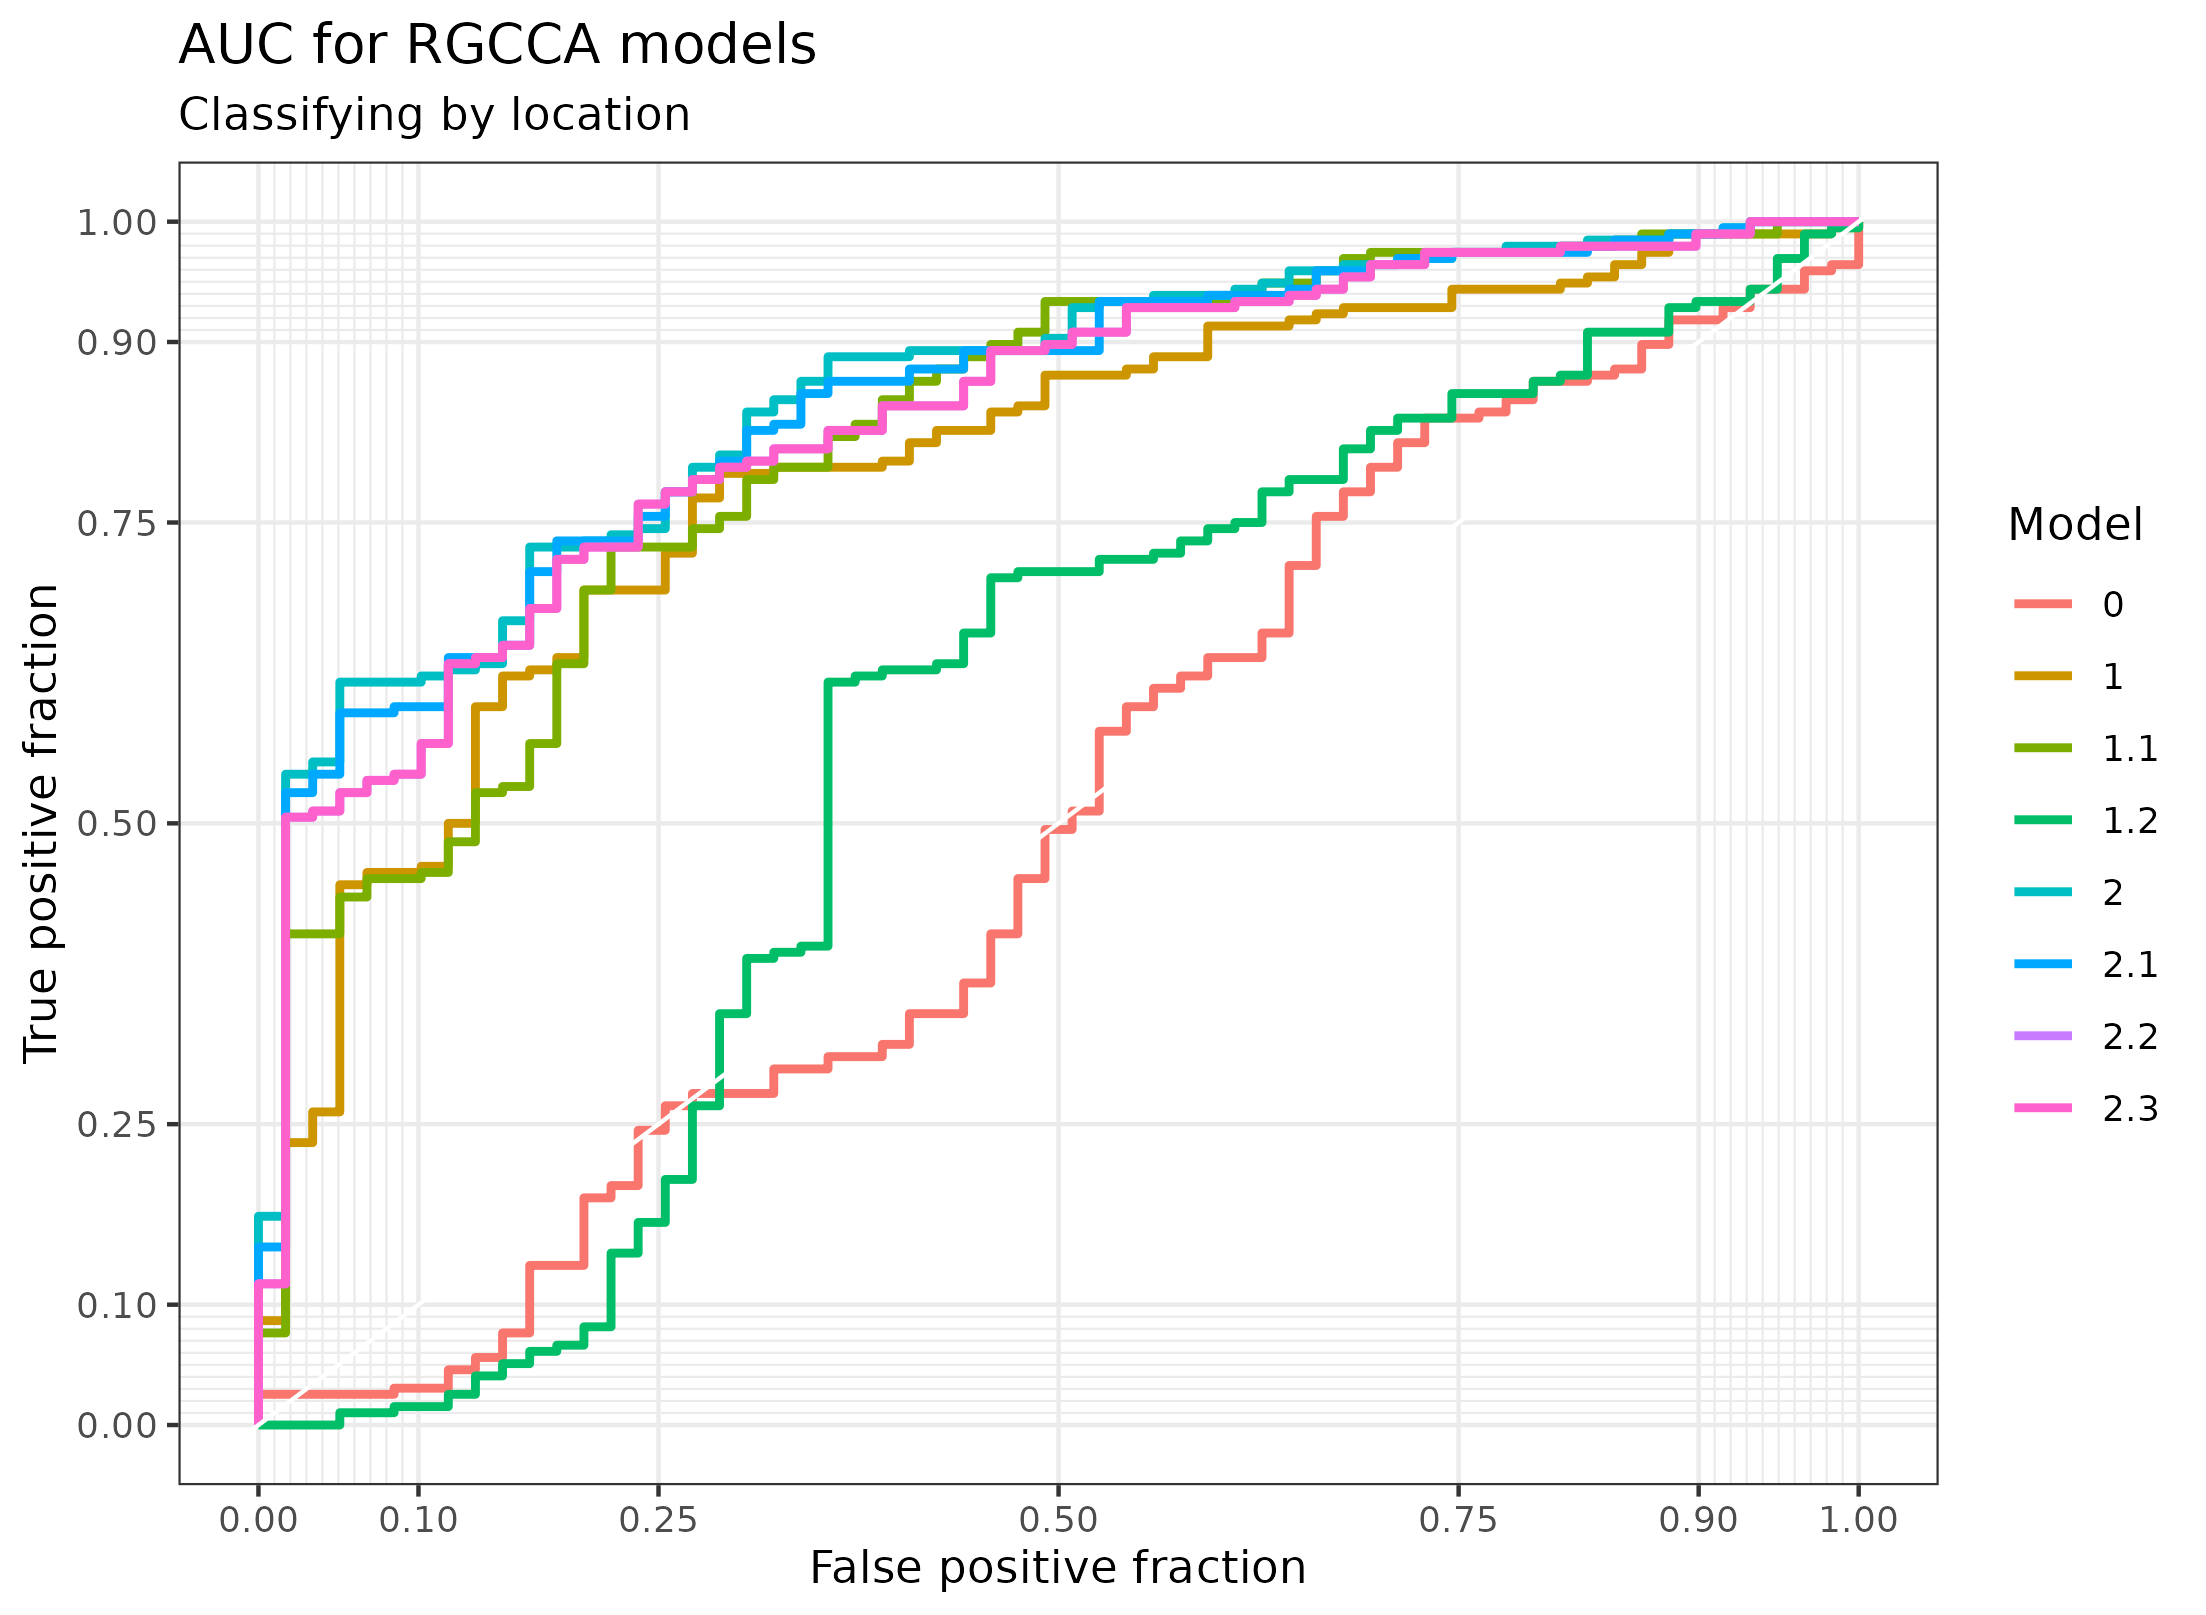 AUC of the RGCCA models in the Morgan dataset. The classification of the localization of the sample according to the first component of the gene expression of the models generated with RGCCA on the Morgan dataset.